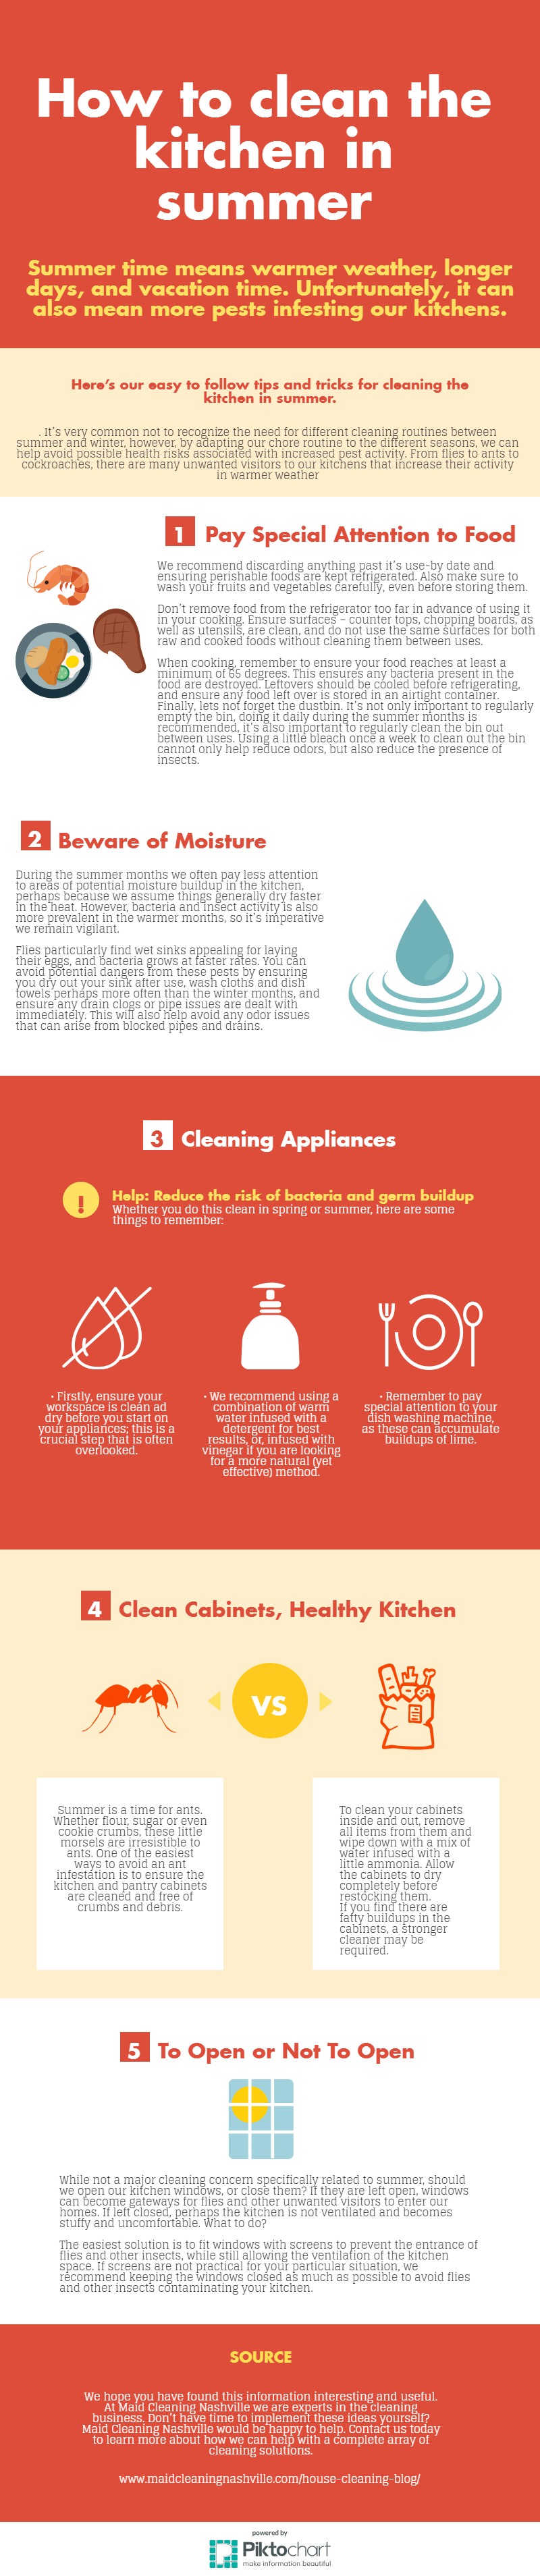 How to clean the kitchen in summer